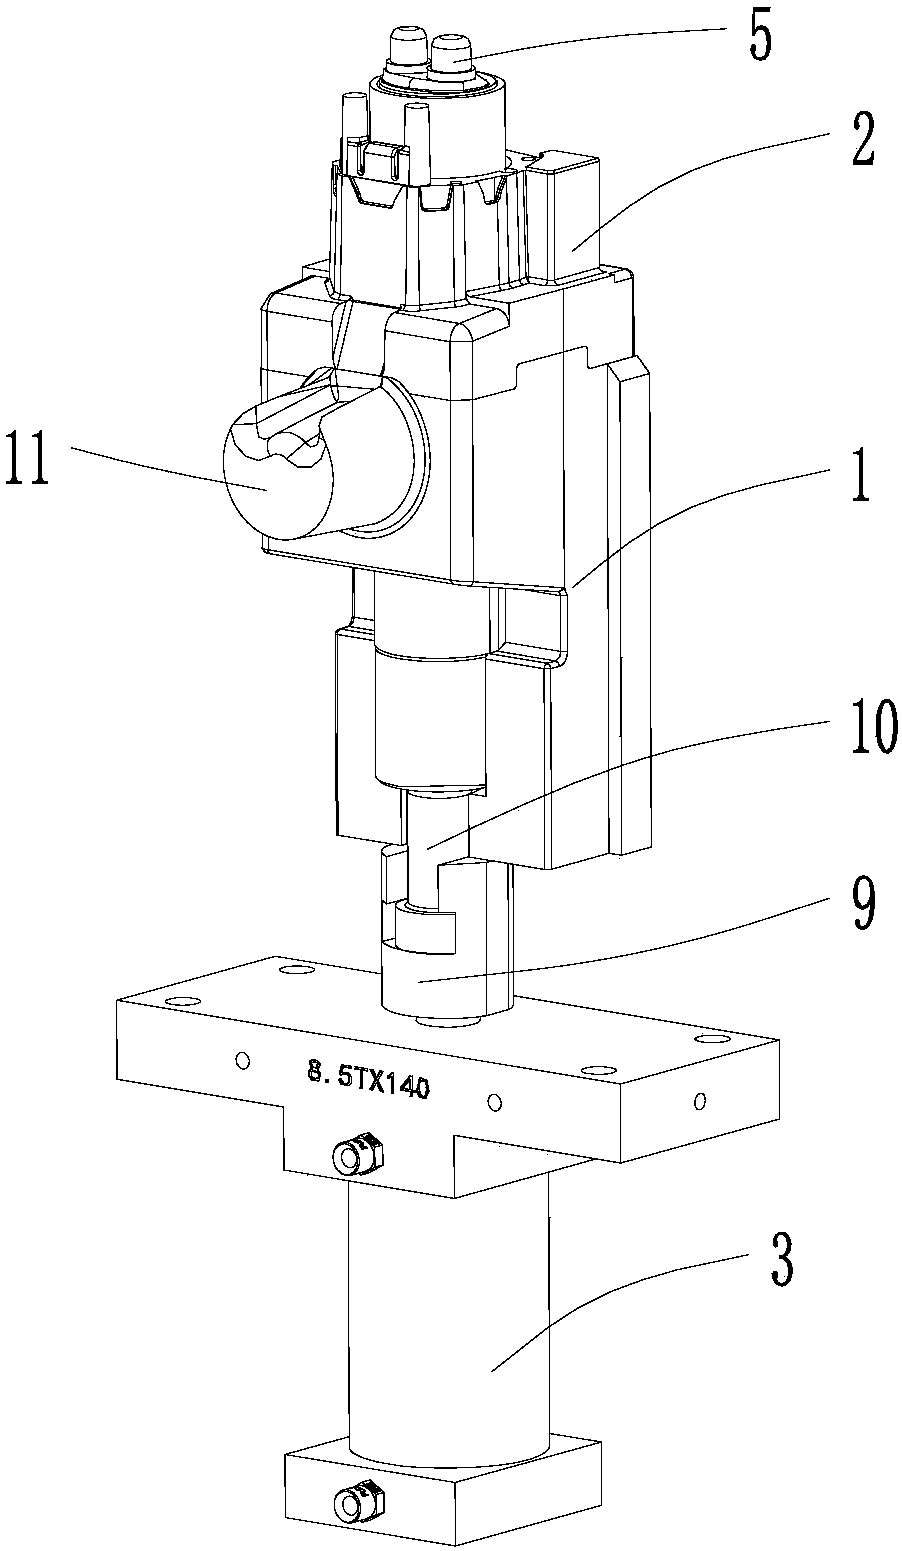 Fast clamping device for cylinder head and cylinder sleeve